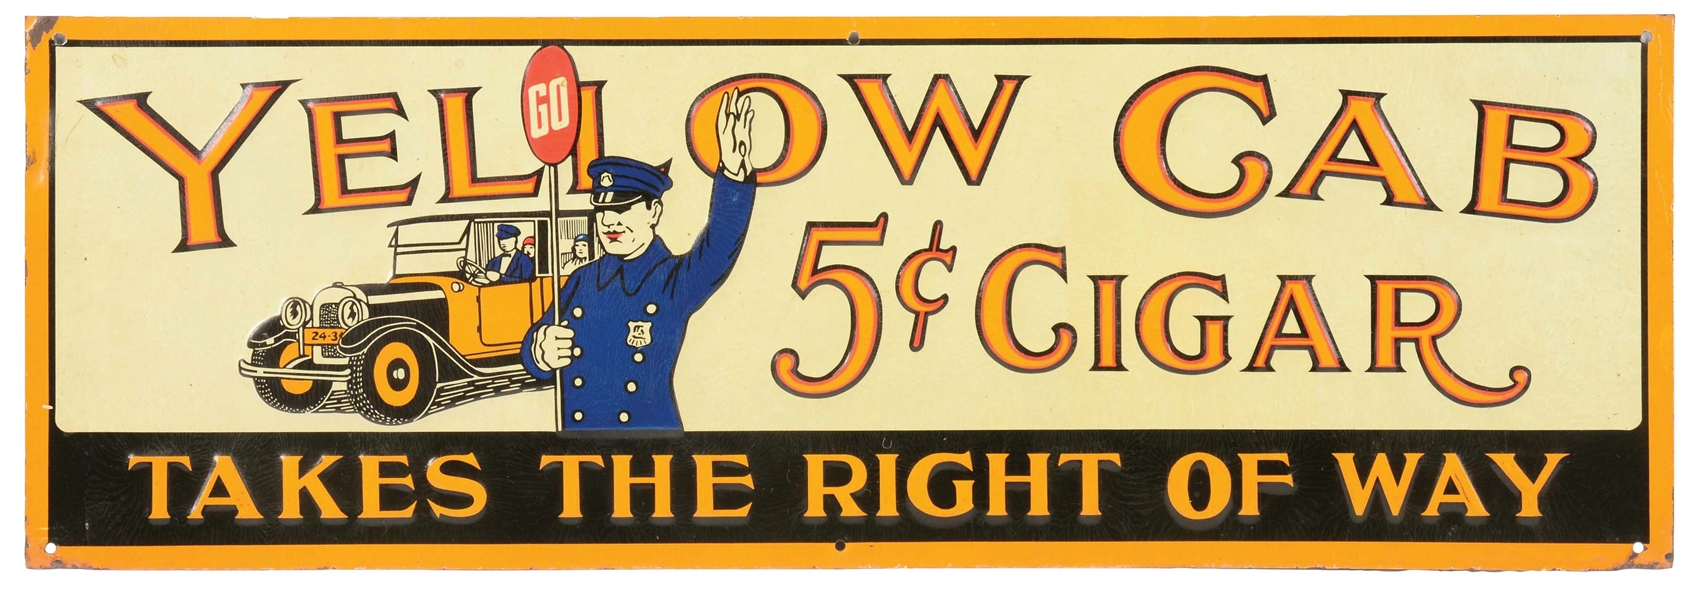 YELLOW CAB 5¢ CIGAR "TAKES THE RIGHT OF WAY" EMBOSSED TIN SIGN W/ COP & CAR GRAPHIC. 